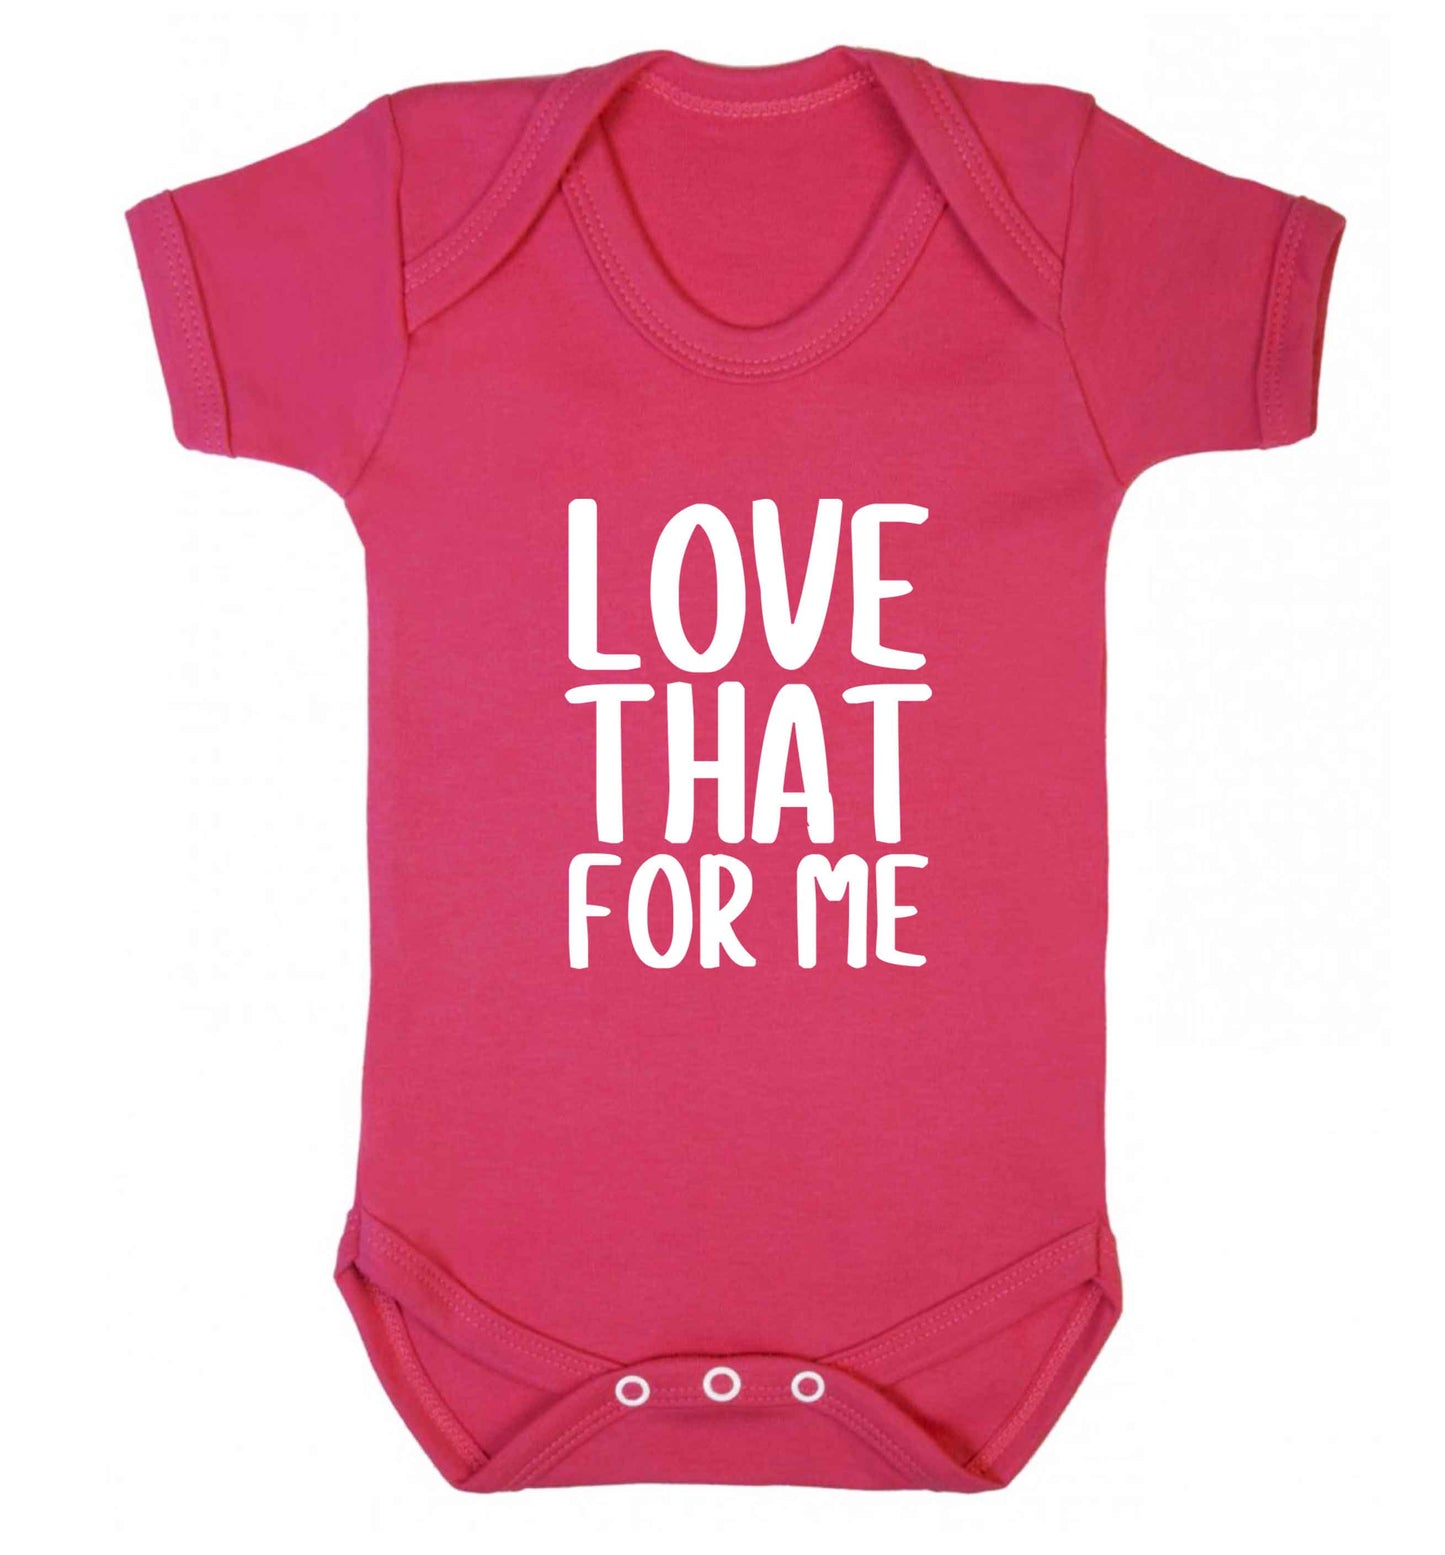 We love this for YOU! Who else loves saying this?!  baby vest dark pink 18-24 months